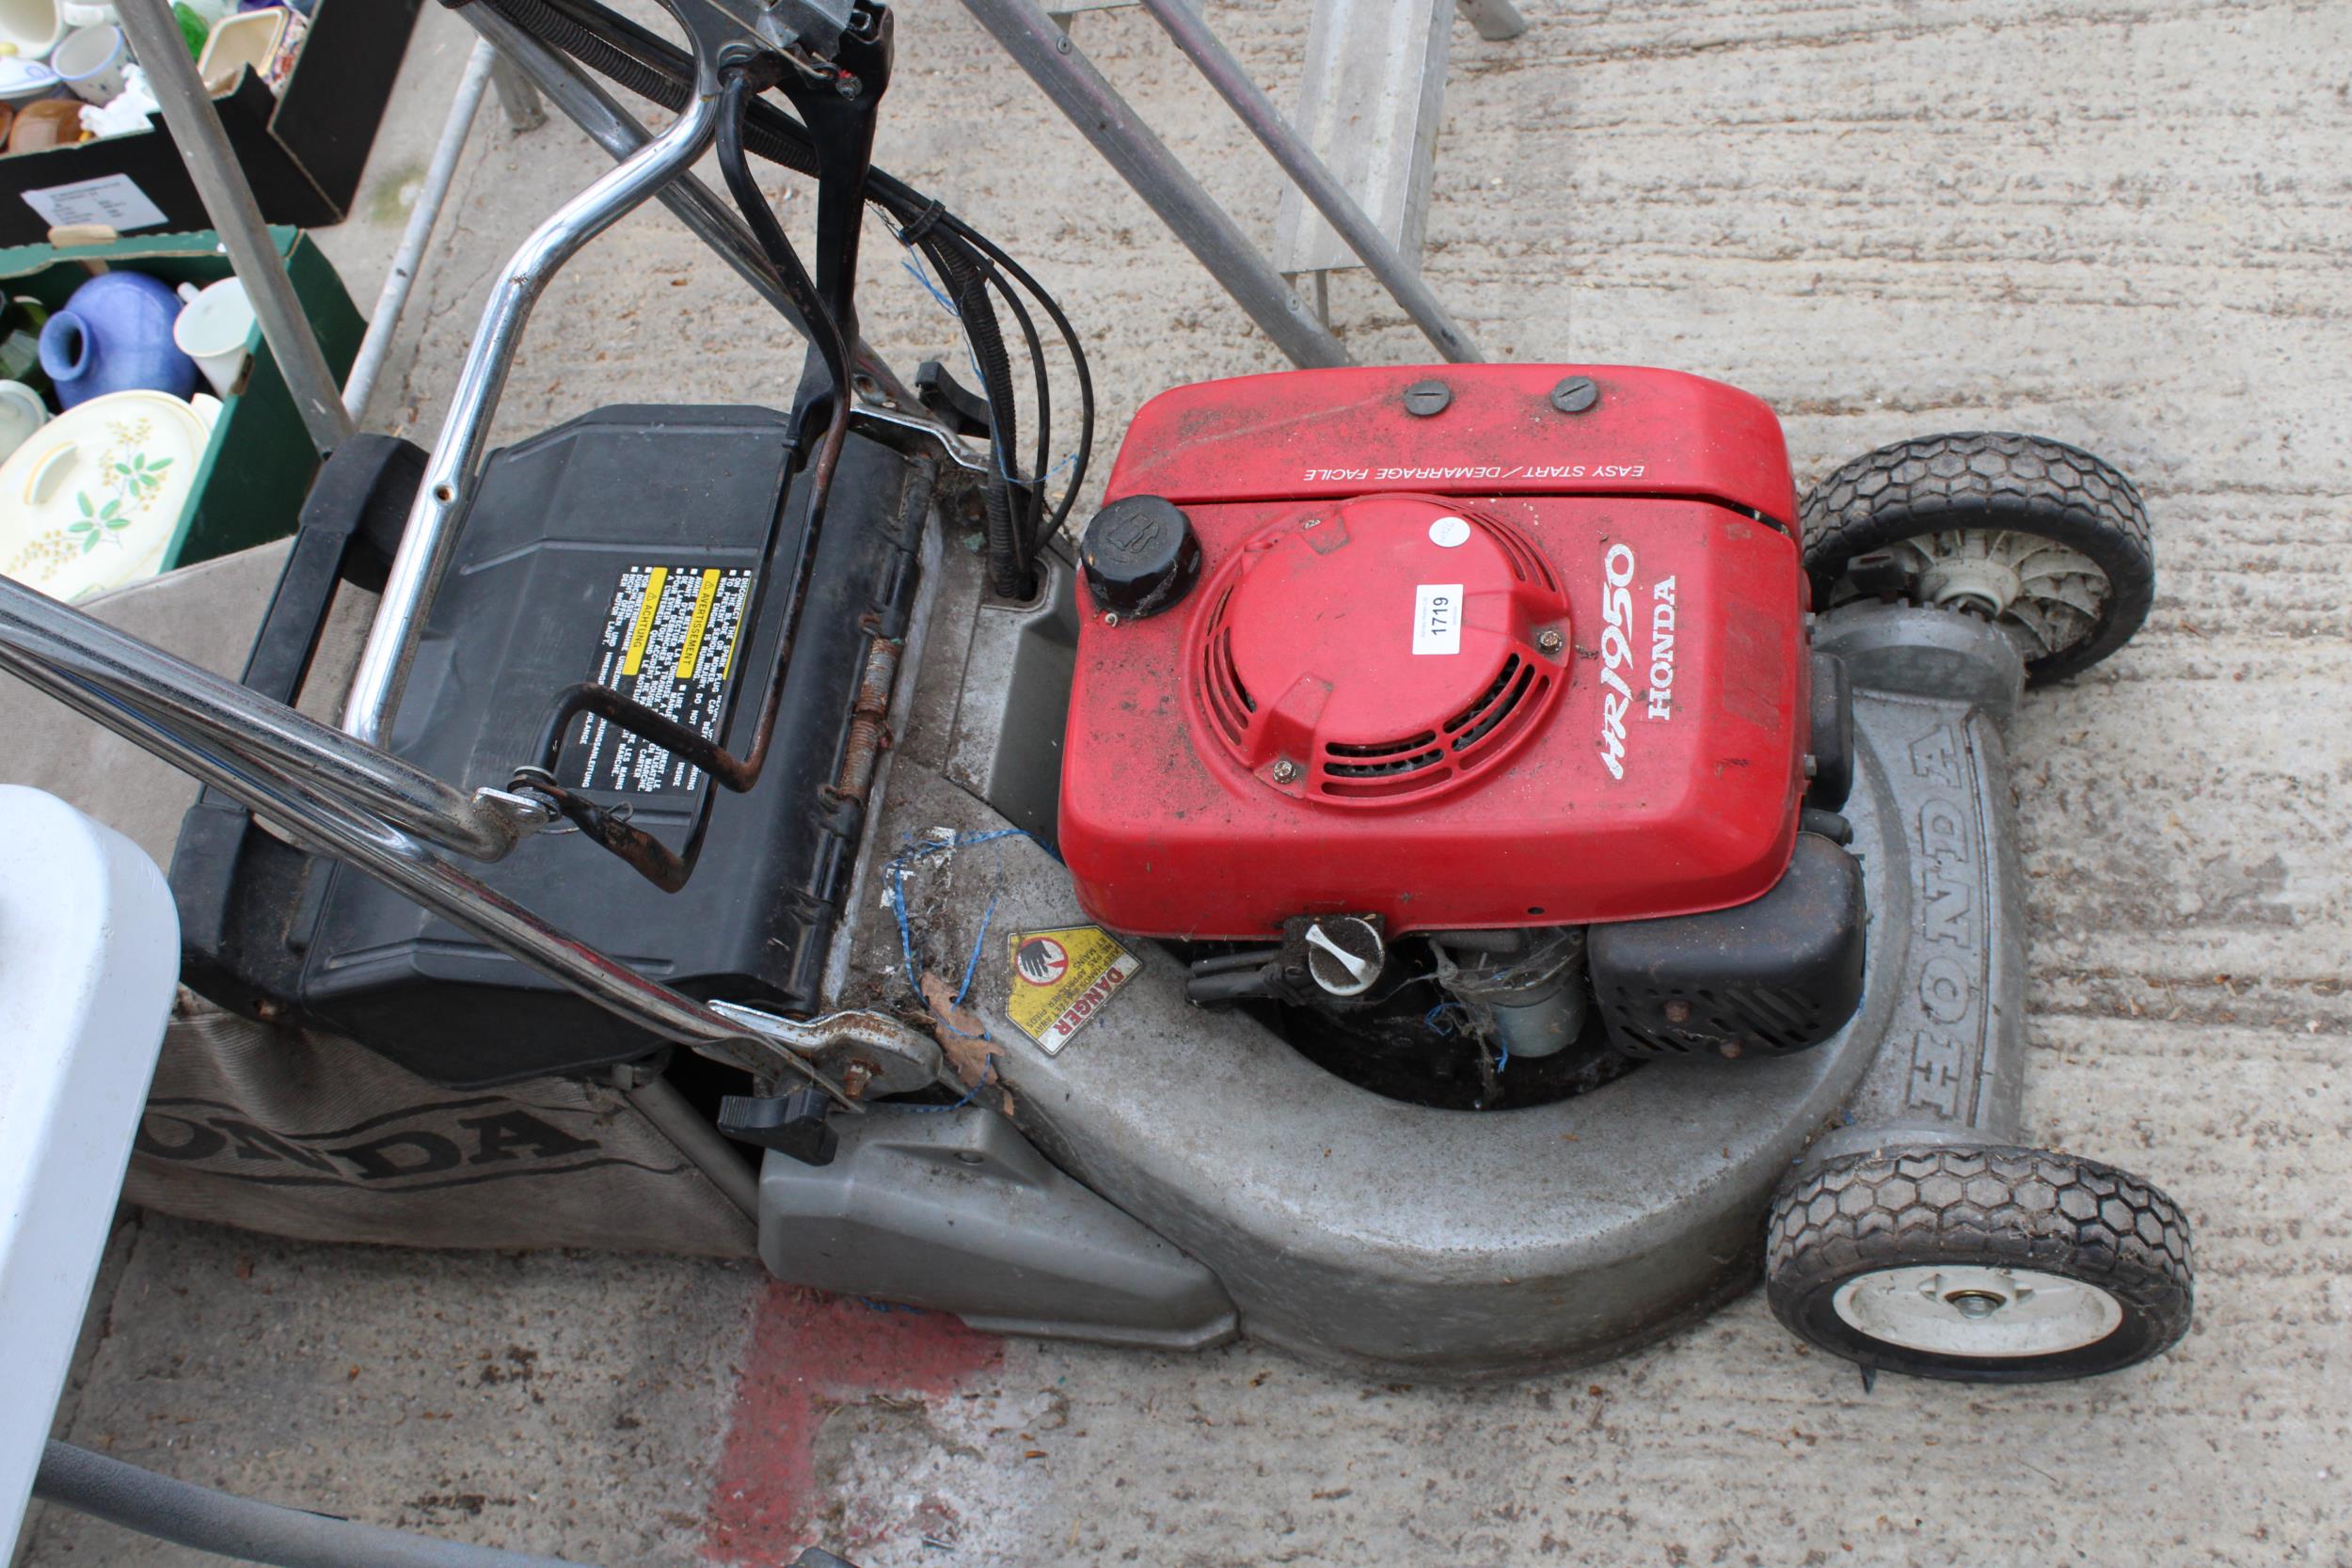 A HONDA HR1950 PETROL LAWN MOWER WITH GRASS BOX - Image 2 of 3